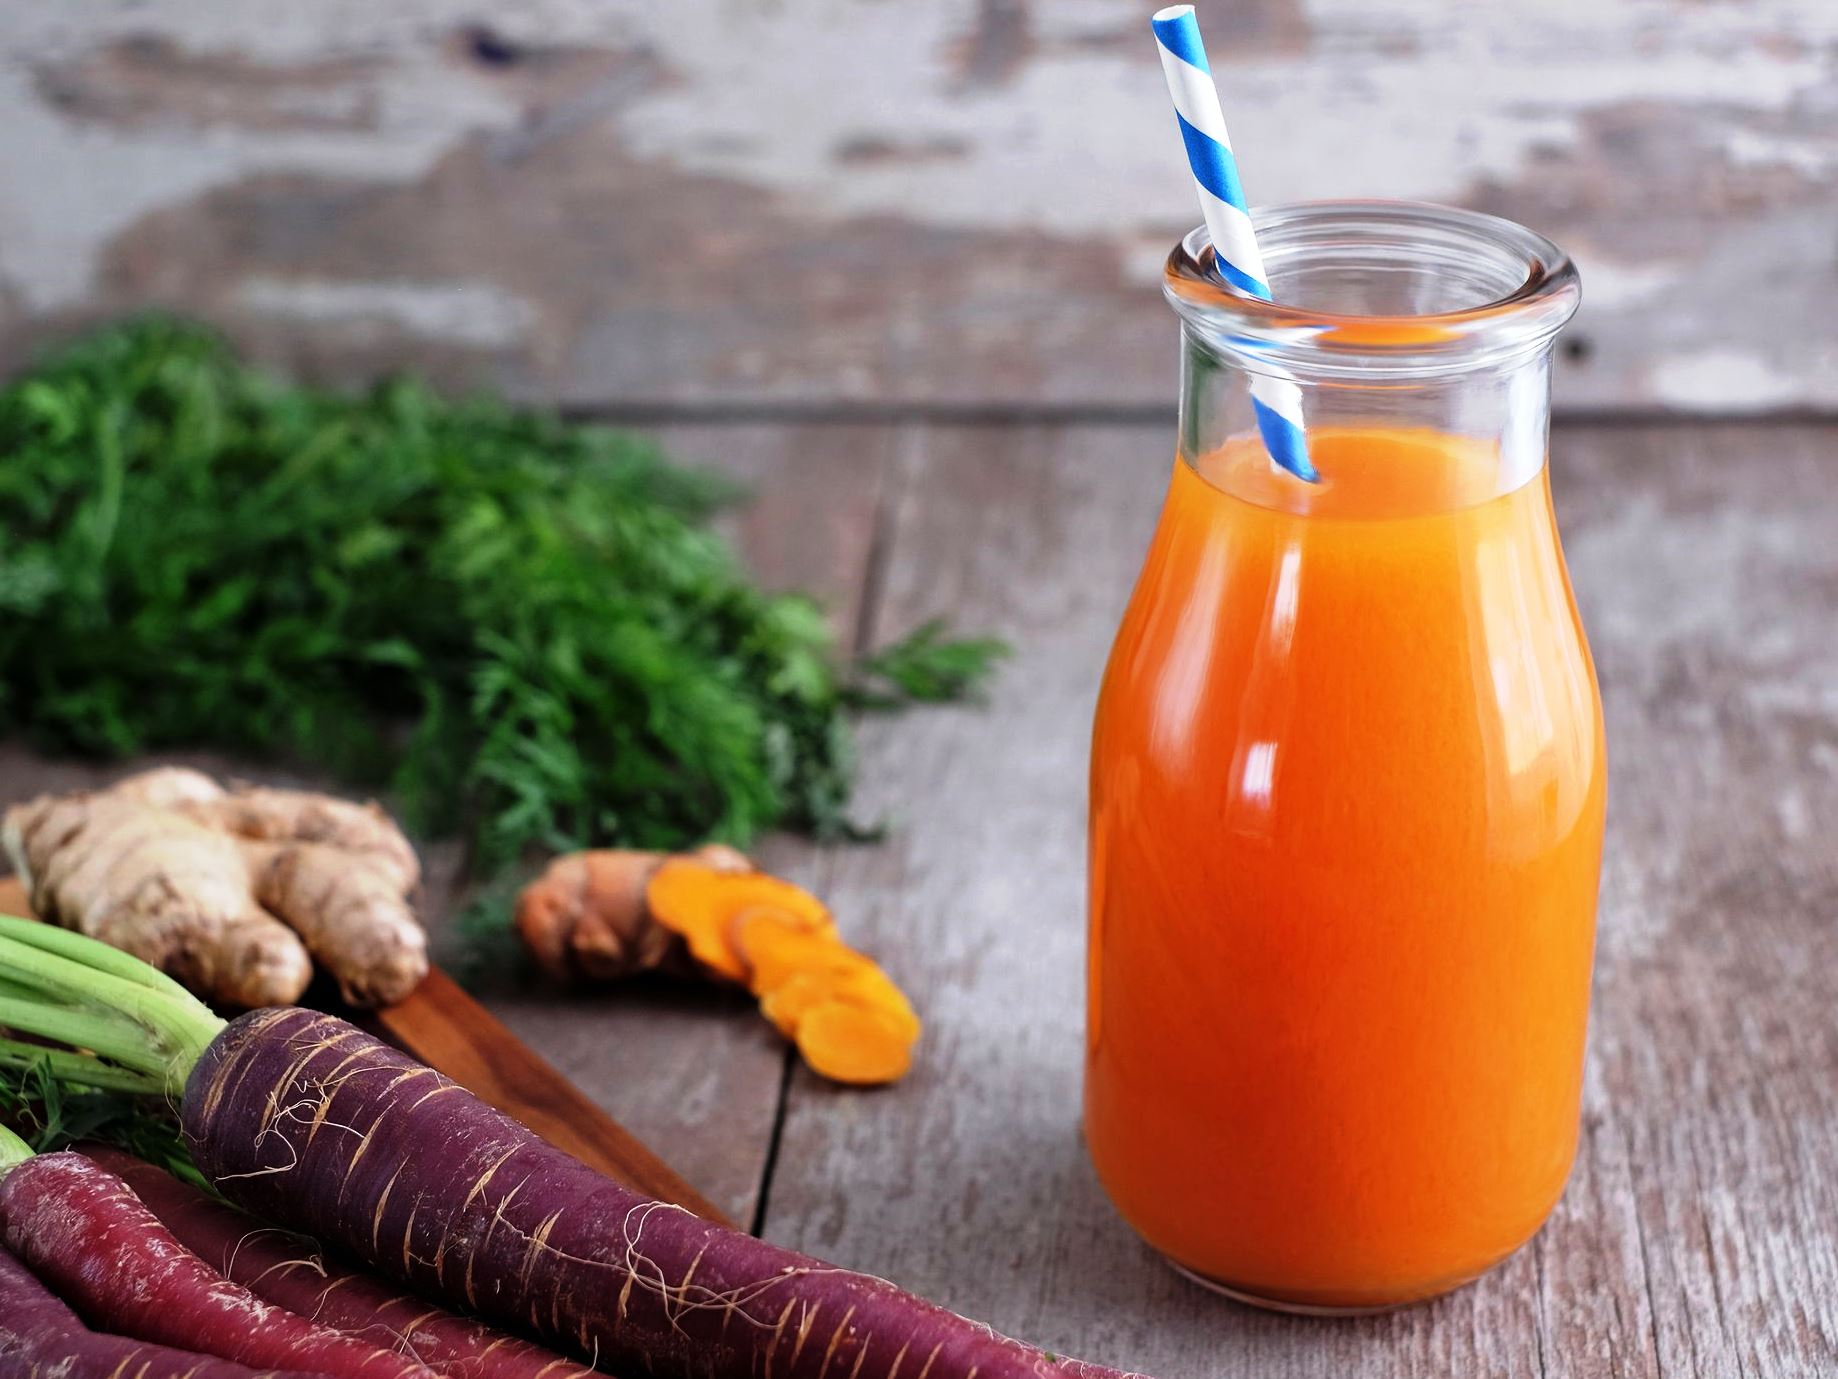 What are the Benefits of Ginger Carrot Juice? 